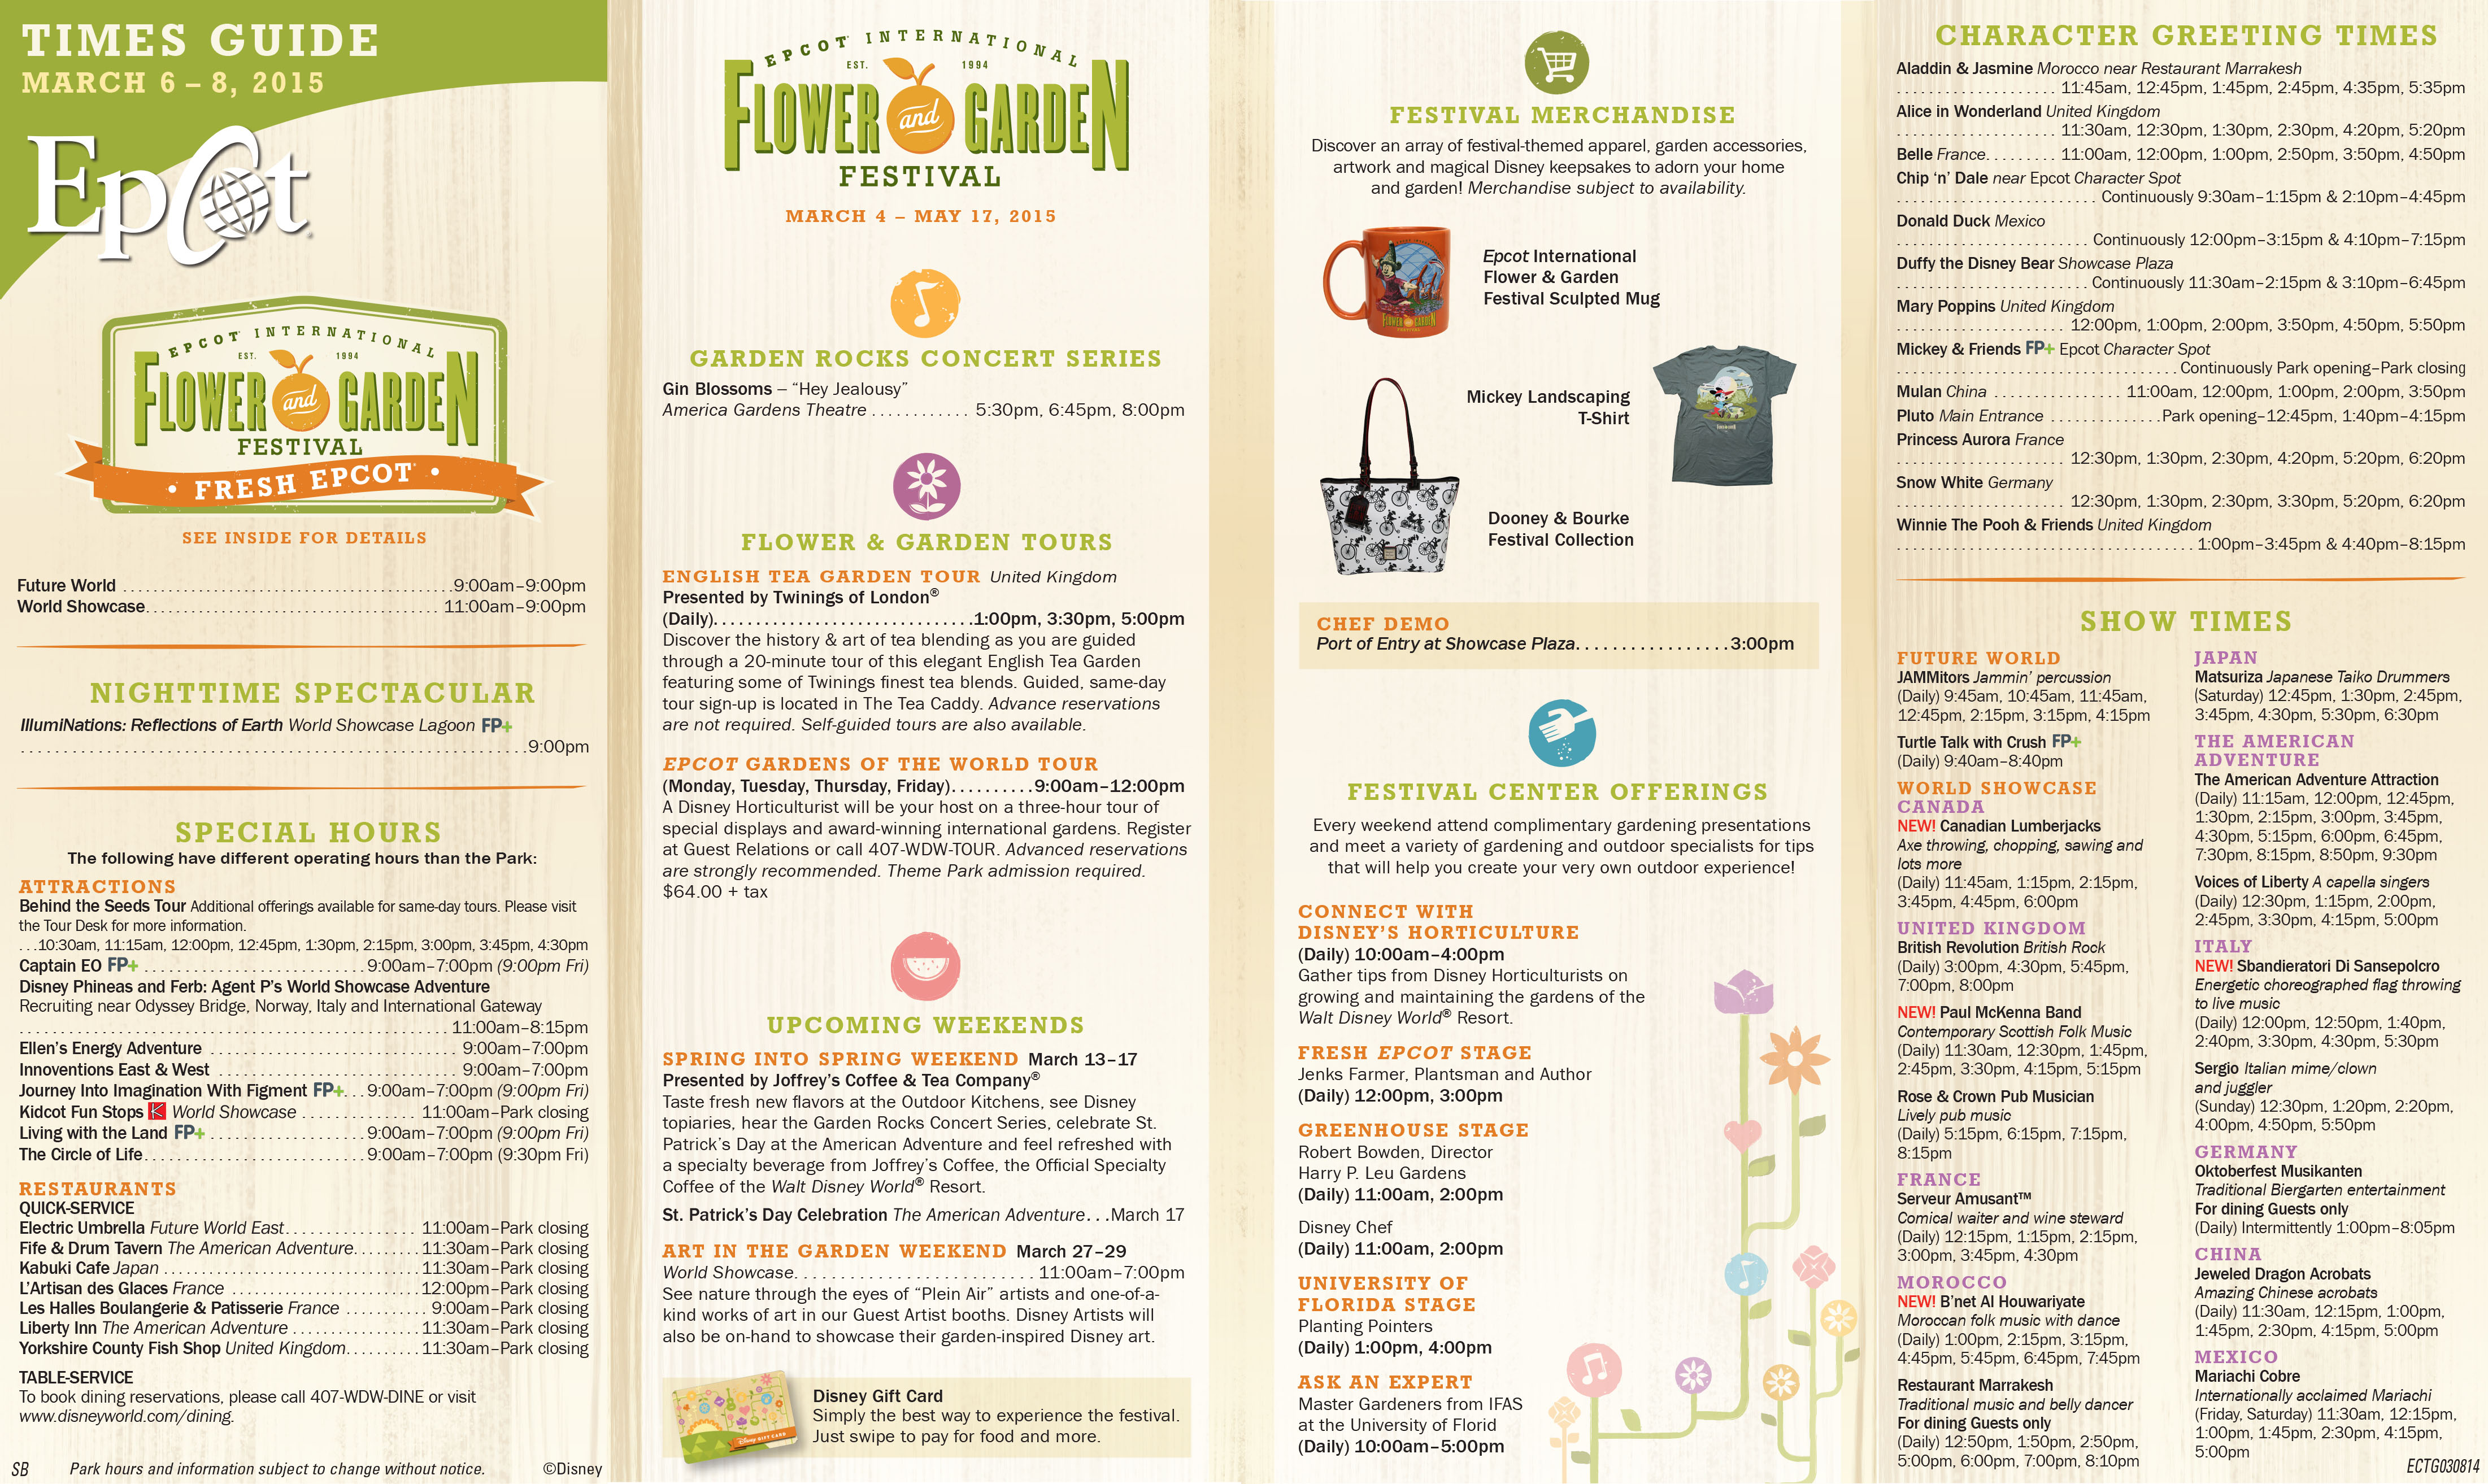 epcot flower and garden festival times guide | kennythepirate